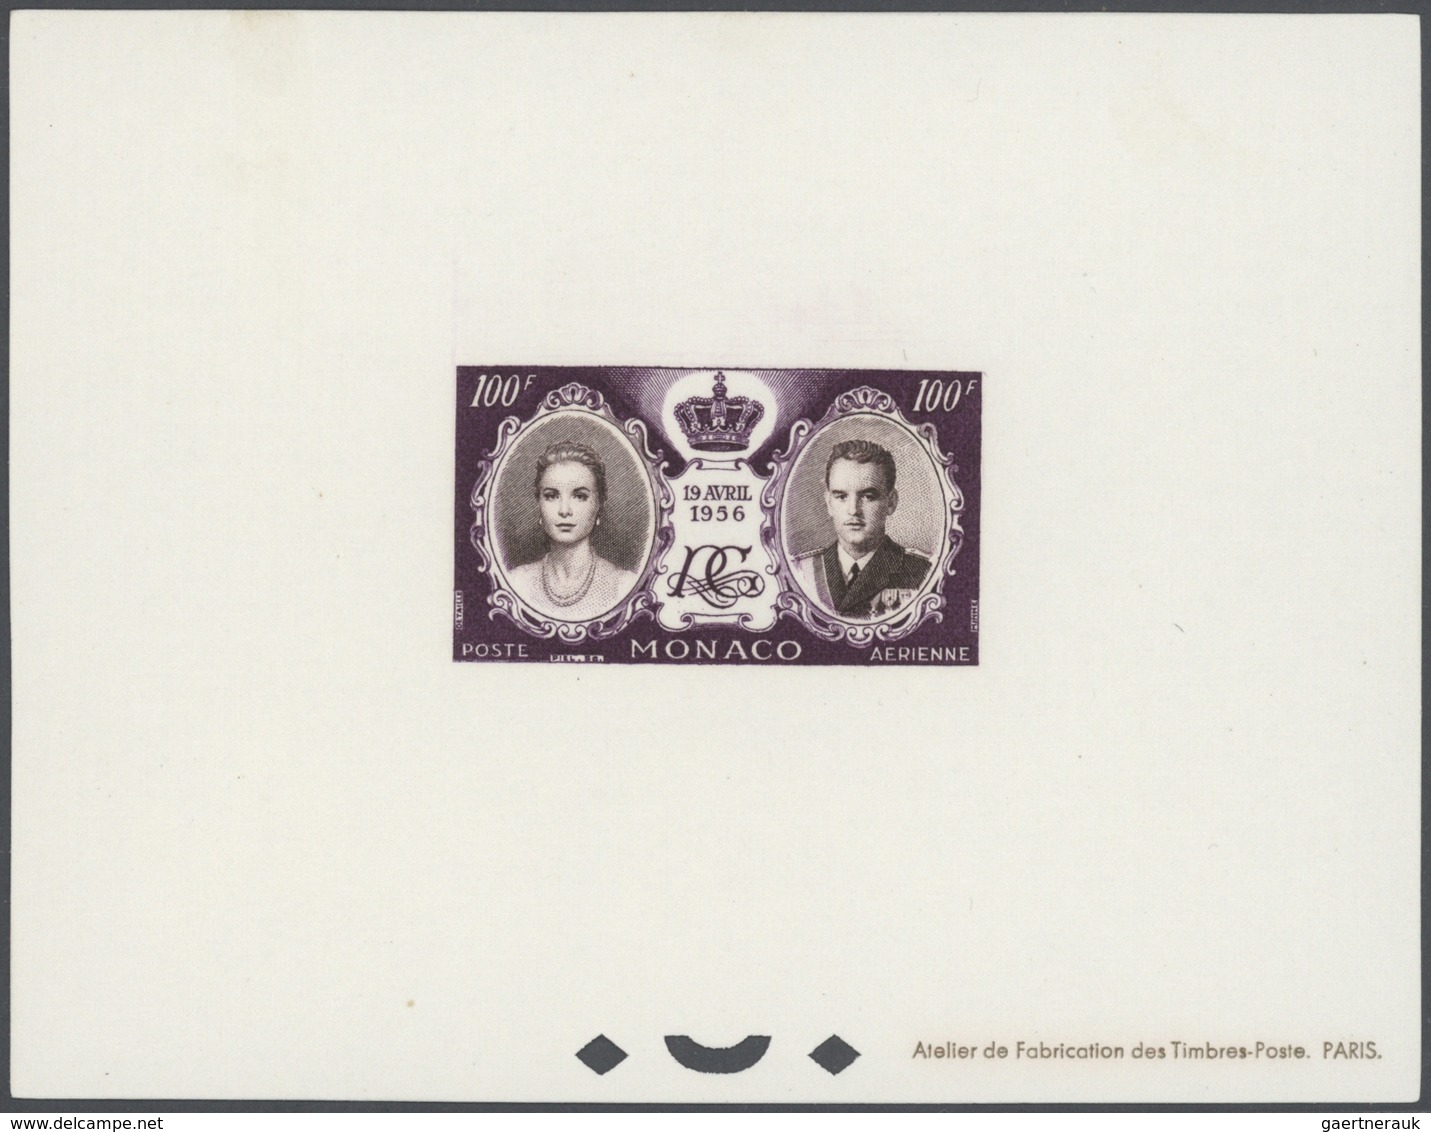 **/(*) Monaco: 1956, Royal Wedding, Presentation Book comprising a mint and a used set, both bloc specieux